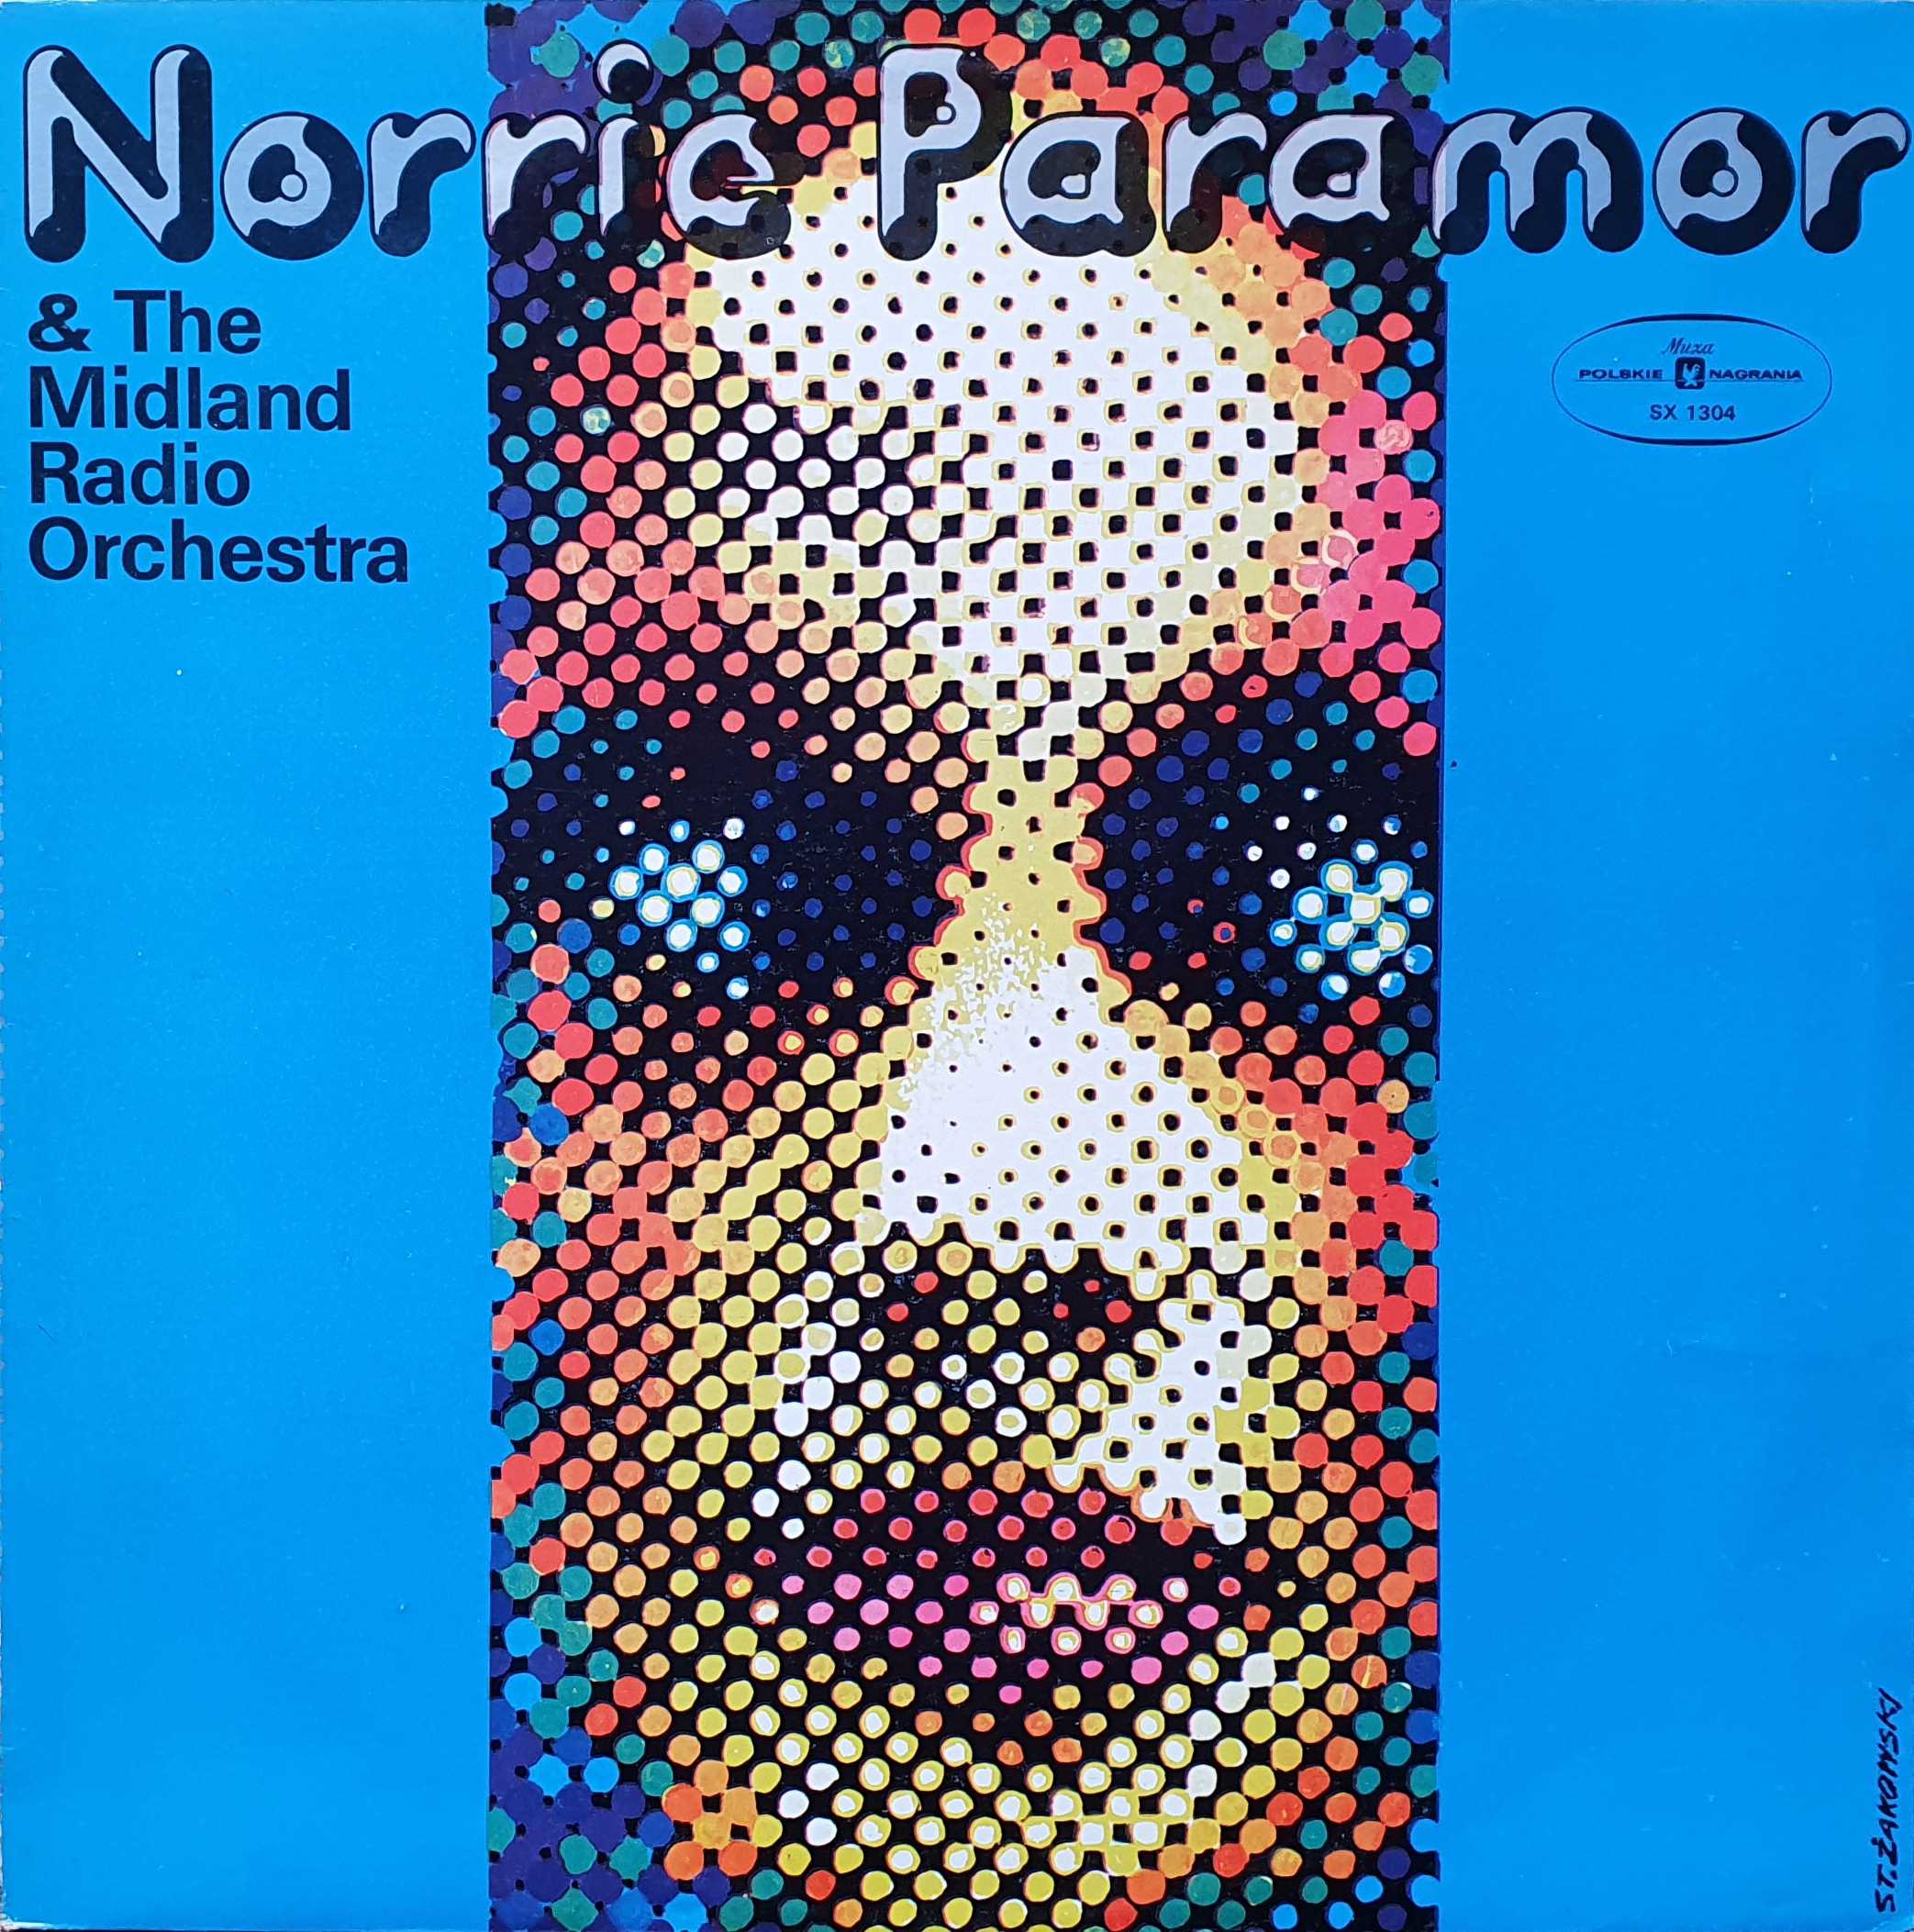 Picture of Norrie Paramor and the Midland Radio Orchestra - Polish import by artist Various from the BBC albums - Records and Tapes library